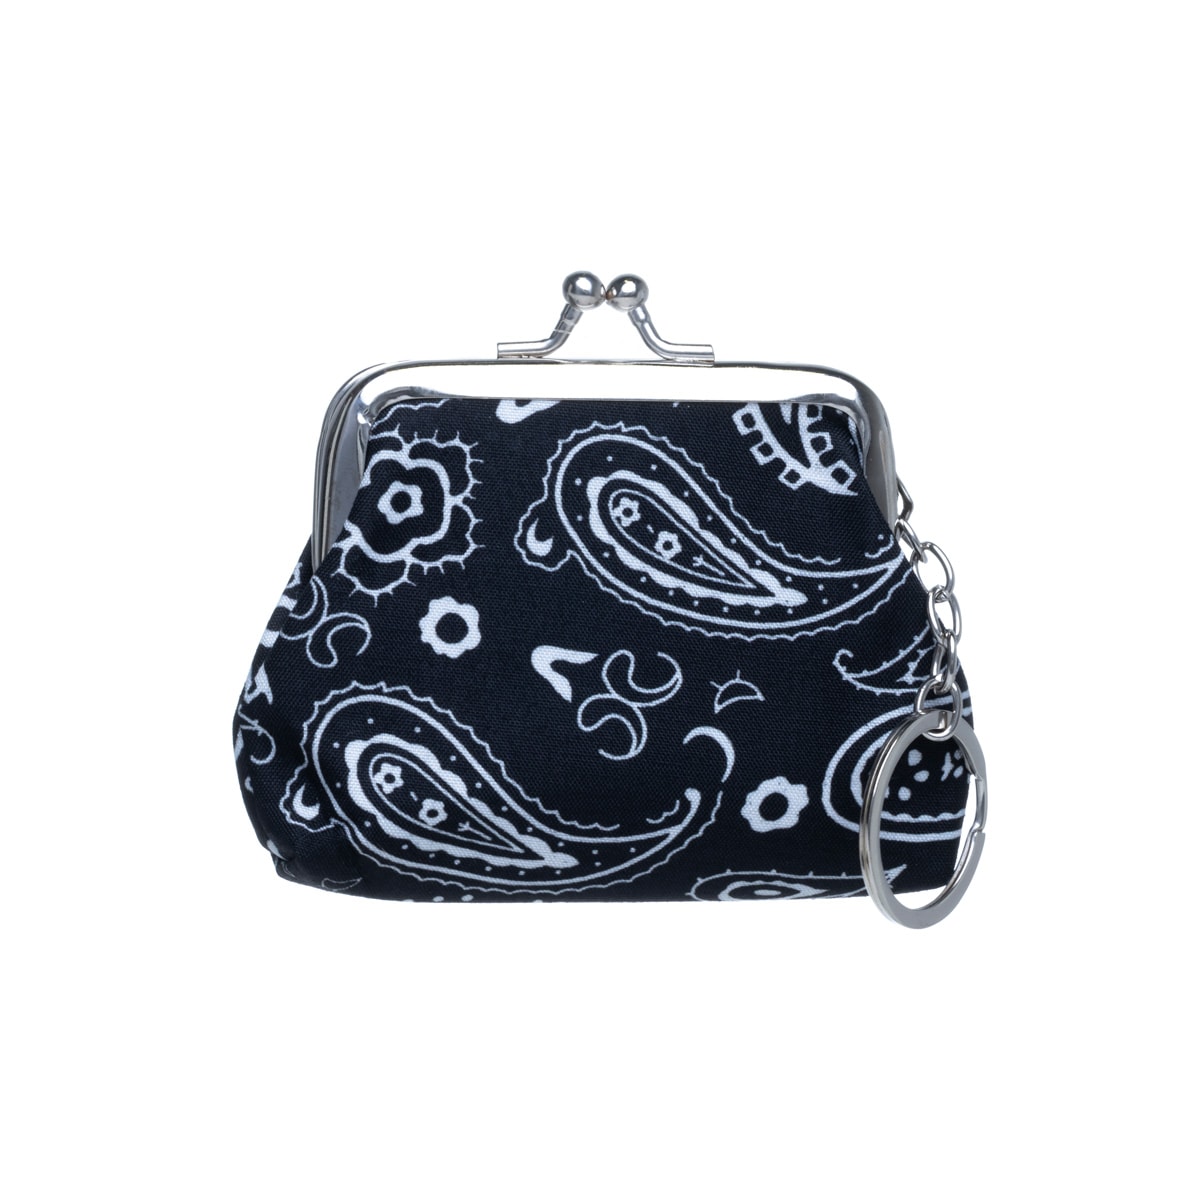 Paisley pattern coin pouch keyring